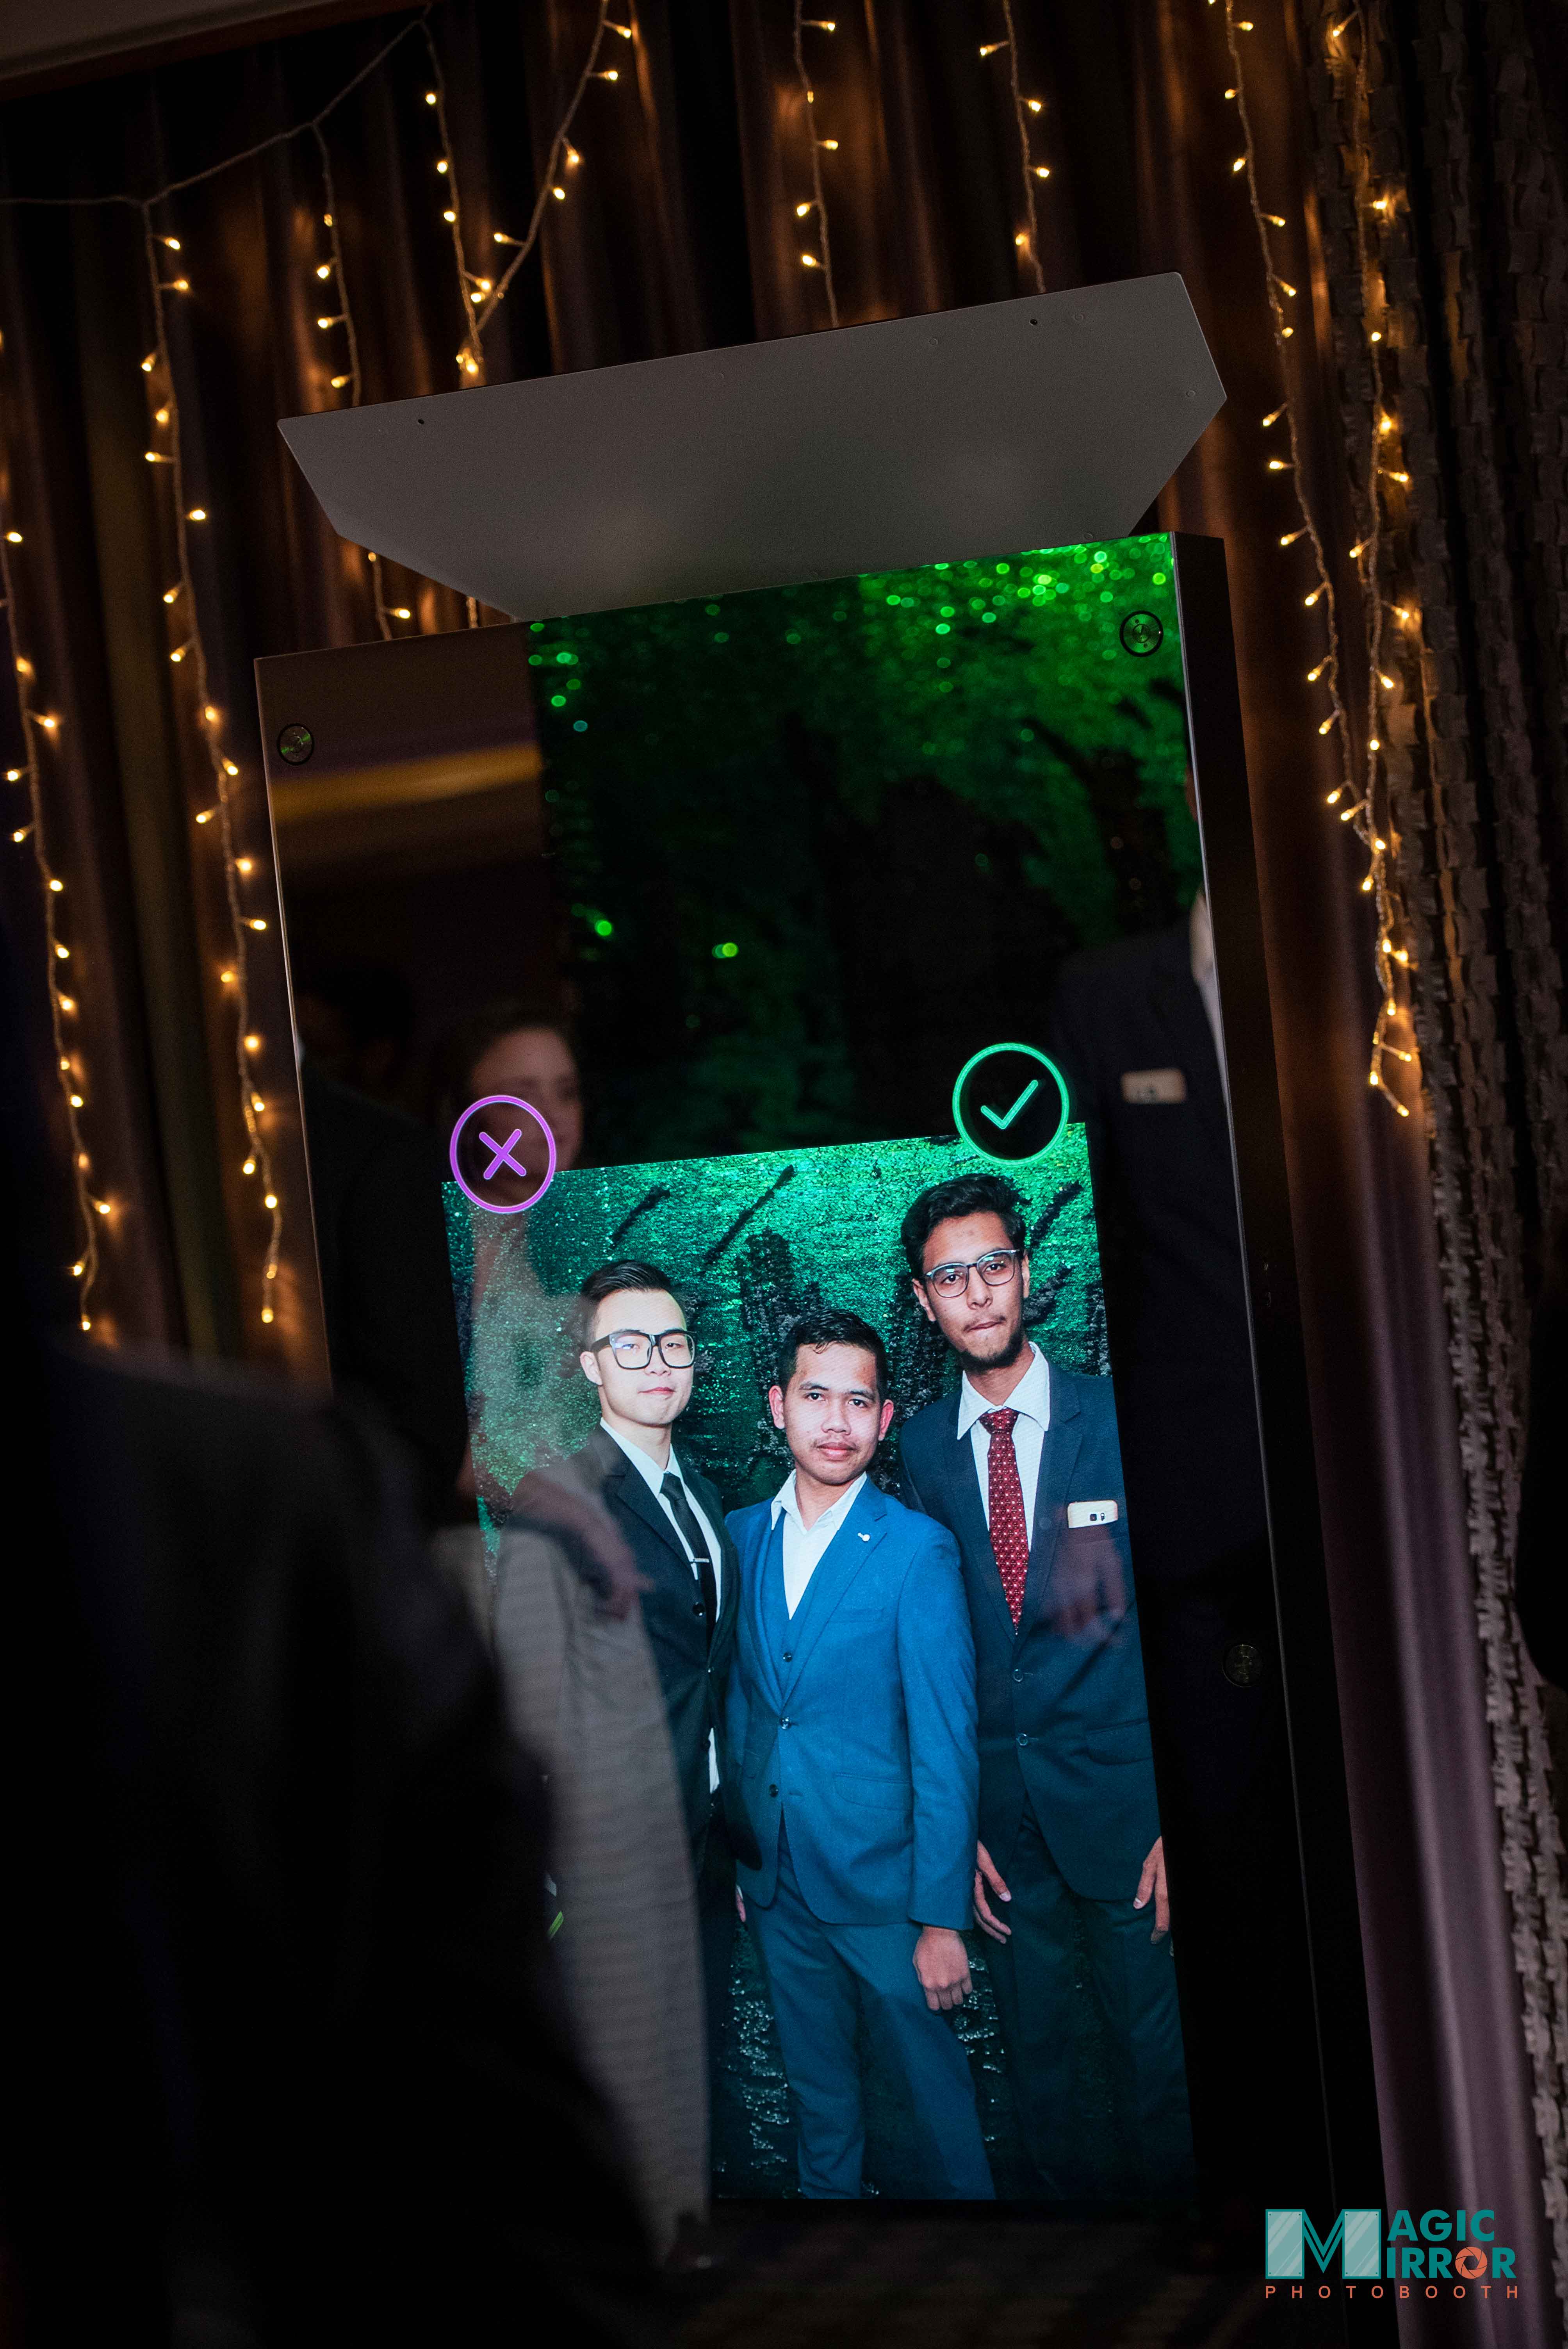 Mirror Photo booth services,